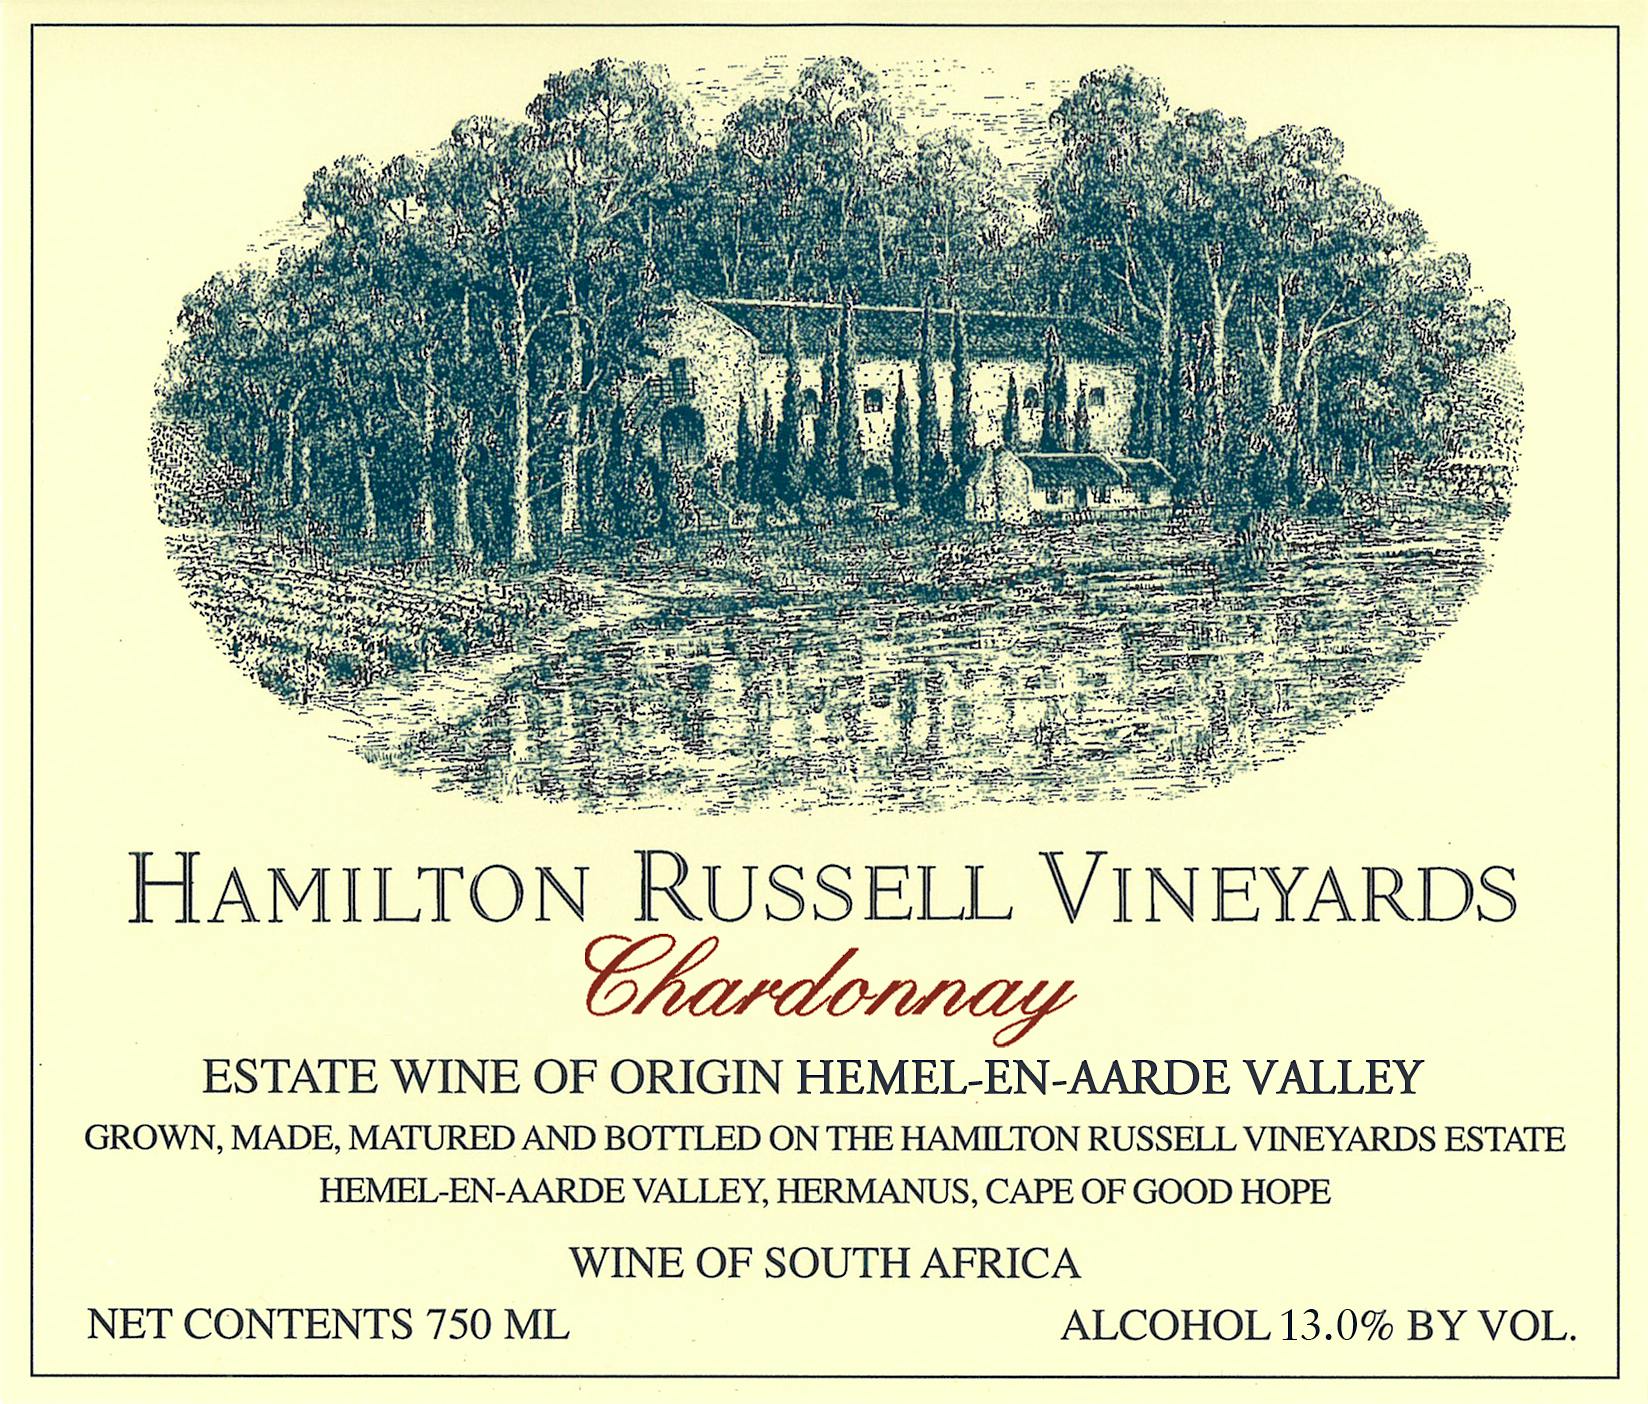 Label for Hamilton Russell